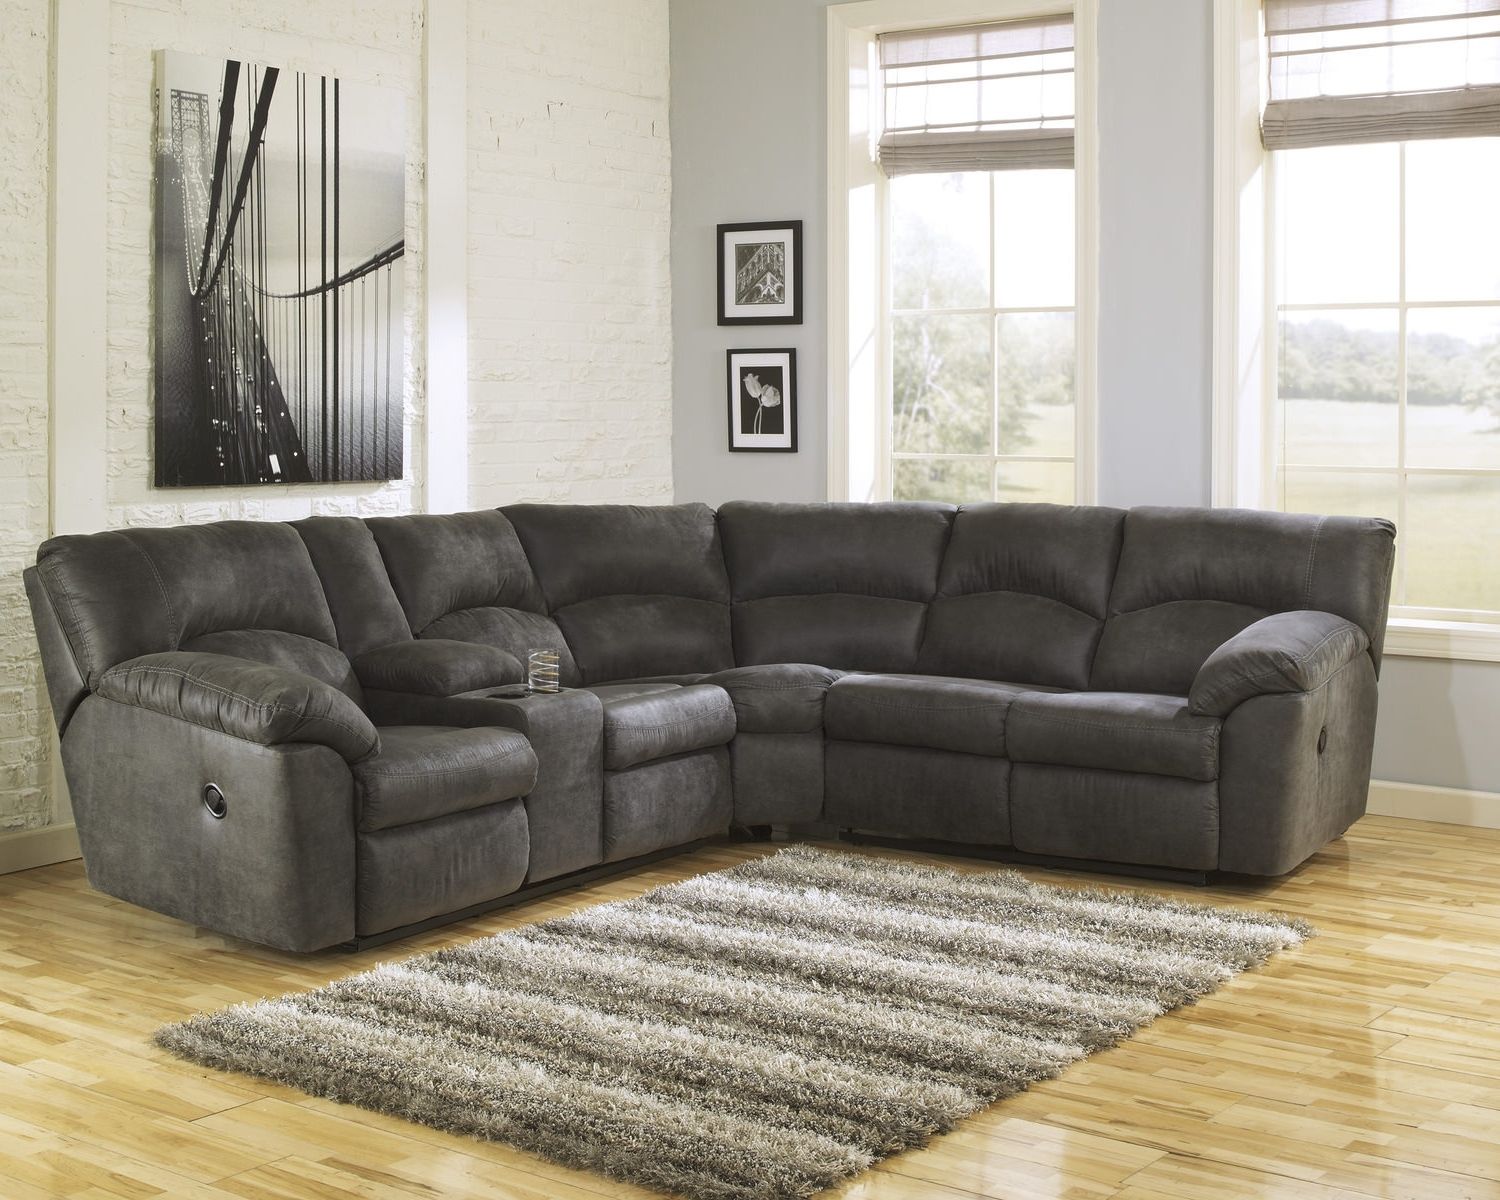 2019 Dock 86 Sectional Sofas With Tambo 2 Piece Reclining Sectional (View 1 of 20)